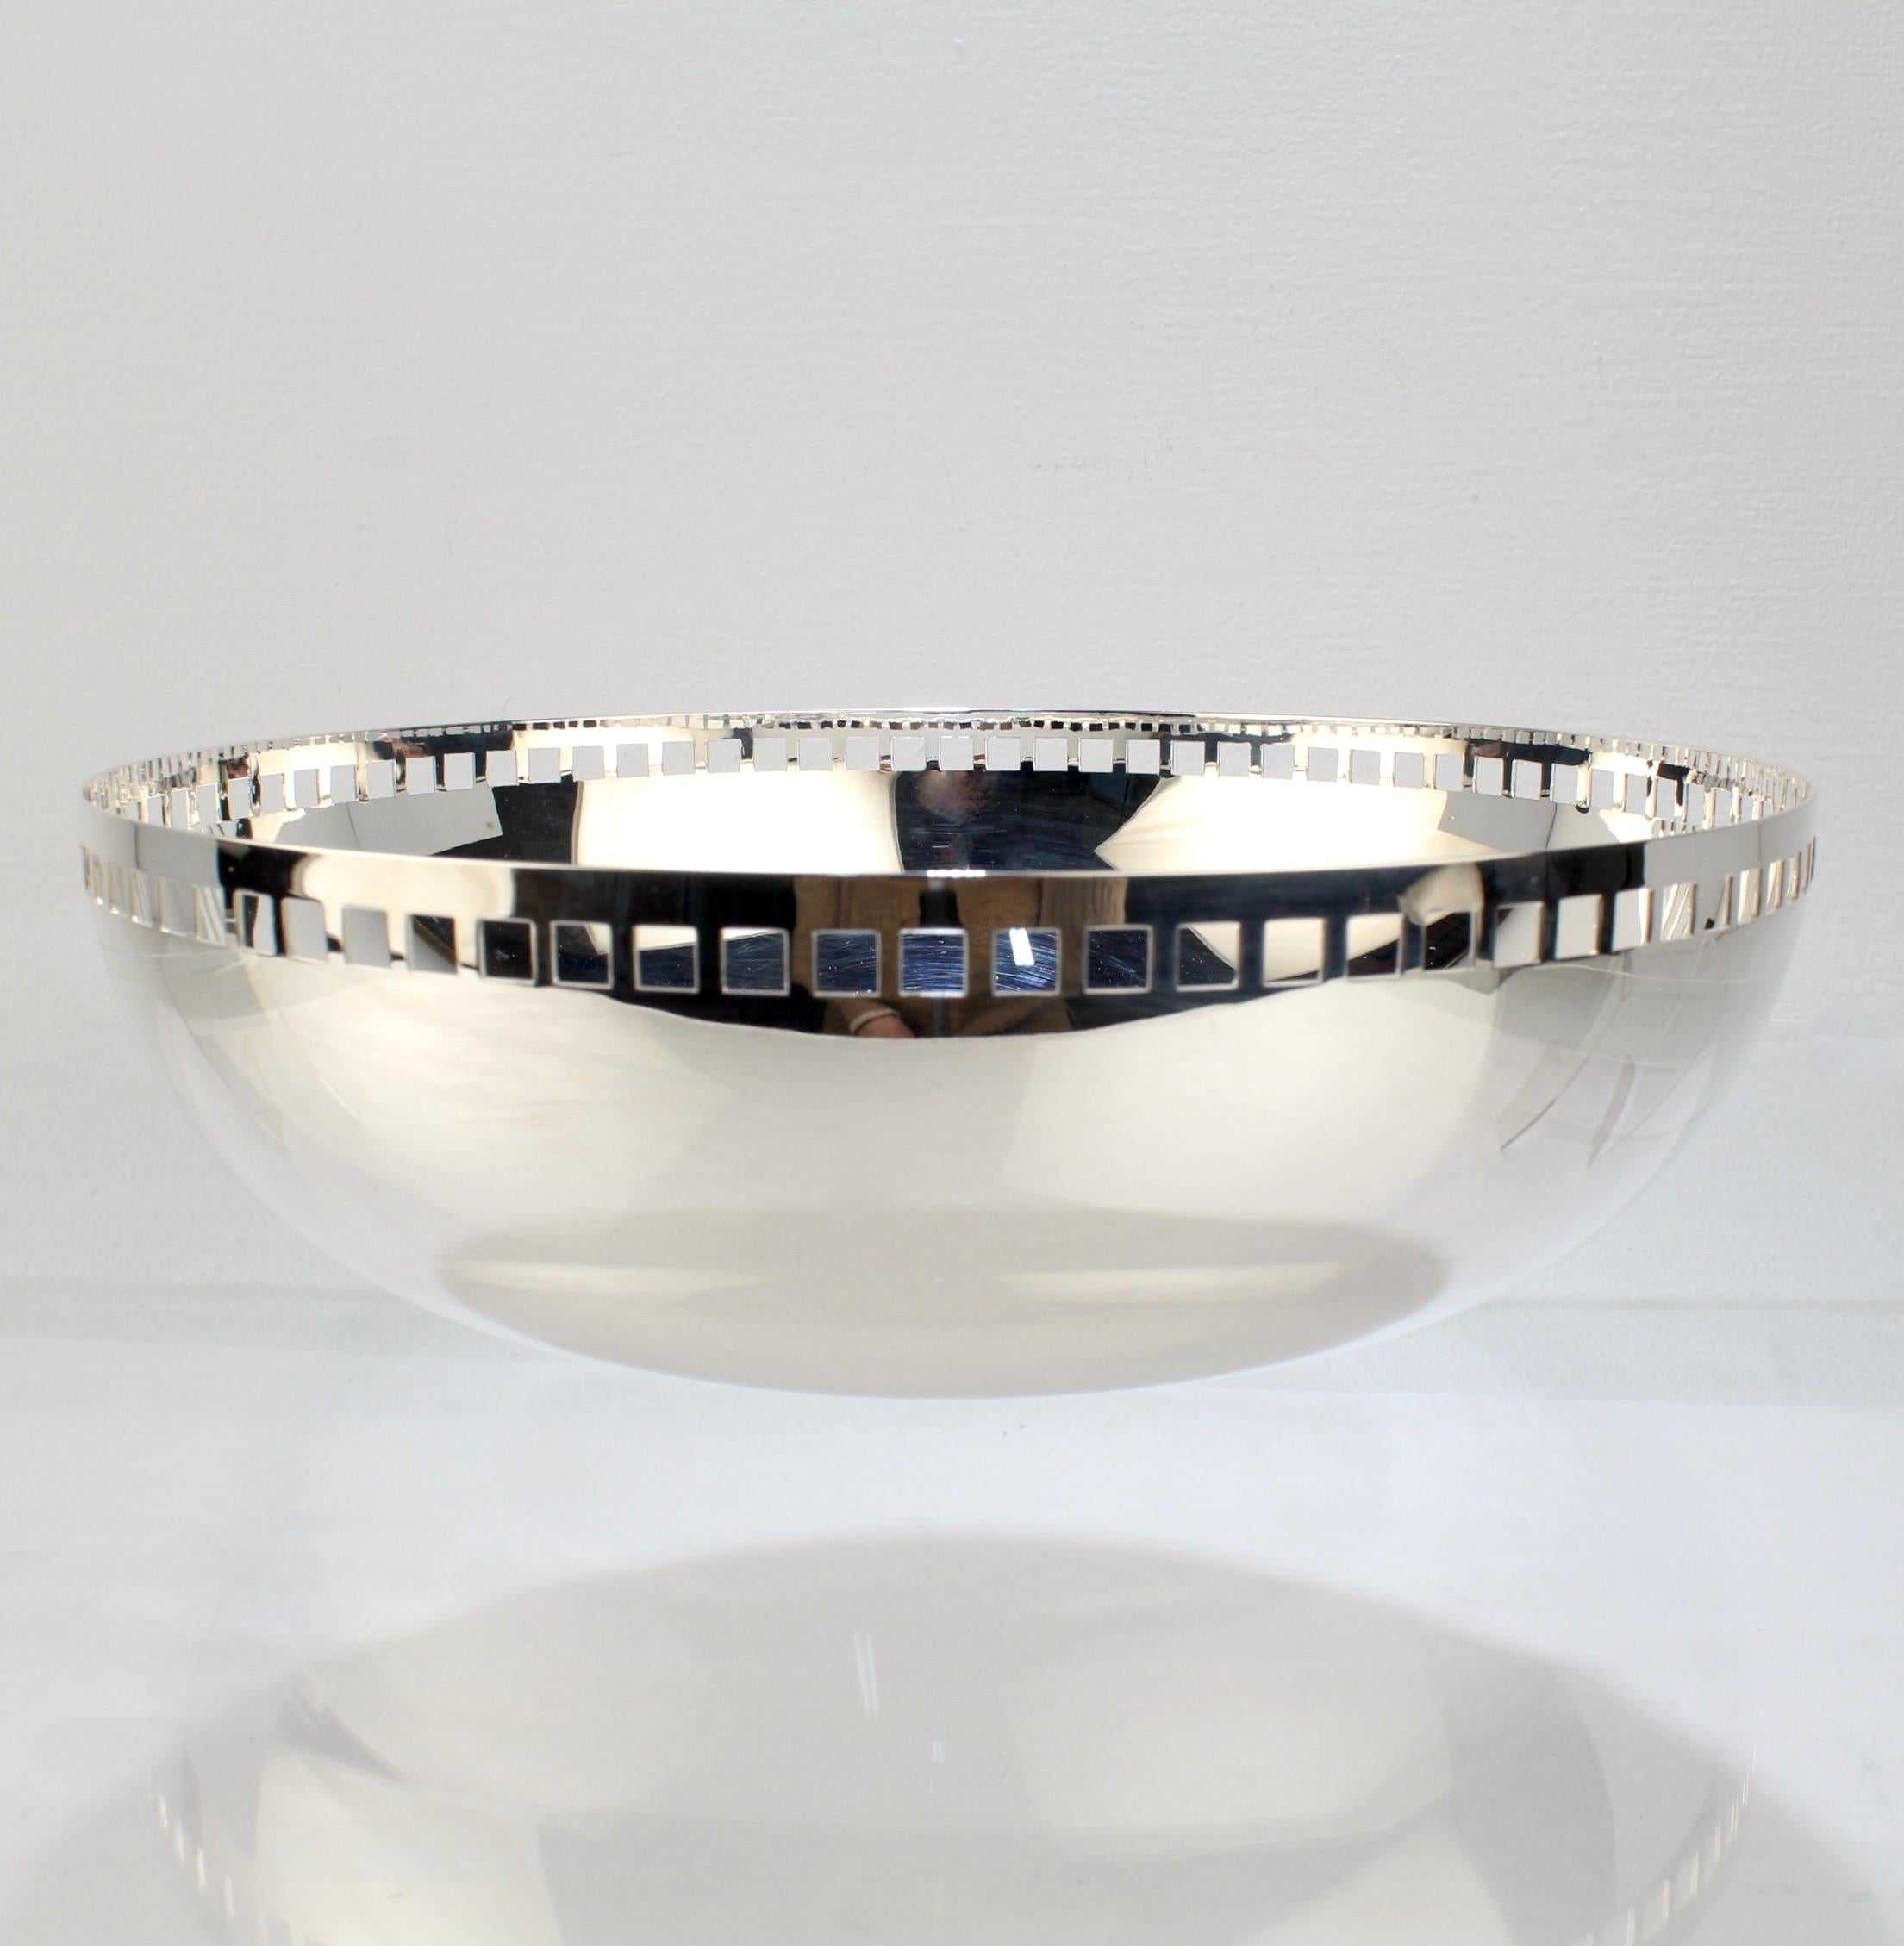 Offered here for your consideration is a fine silver plated fruit bowl.

Additional Details:
Model no. 3052.

Designed by Richard Meier for Swid Powell.

Swid Powell was the highly acclaimed New York City based tableware company founded by Nan Swid